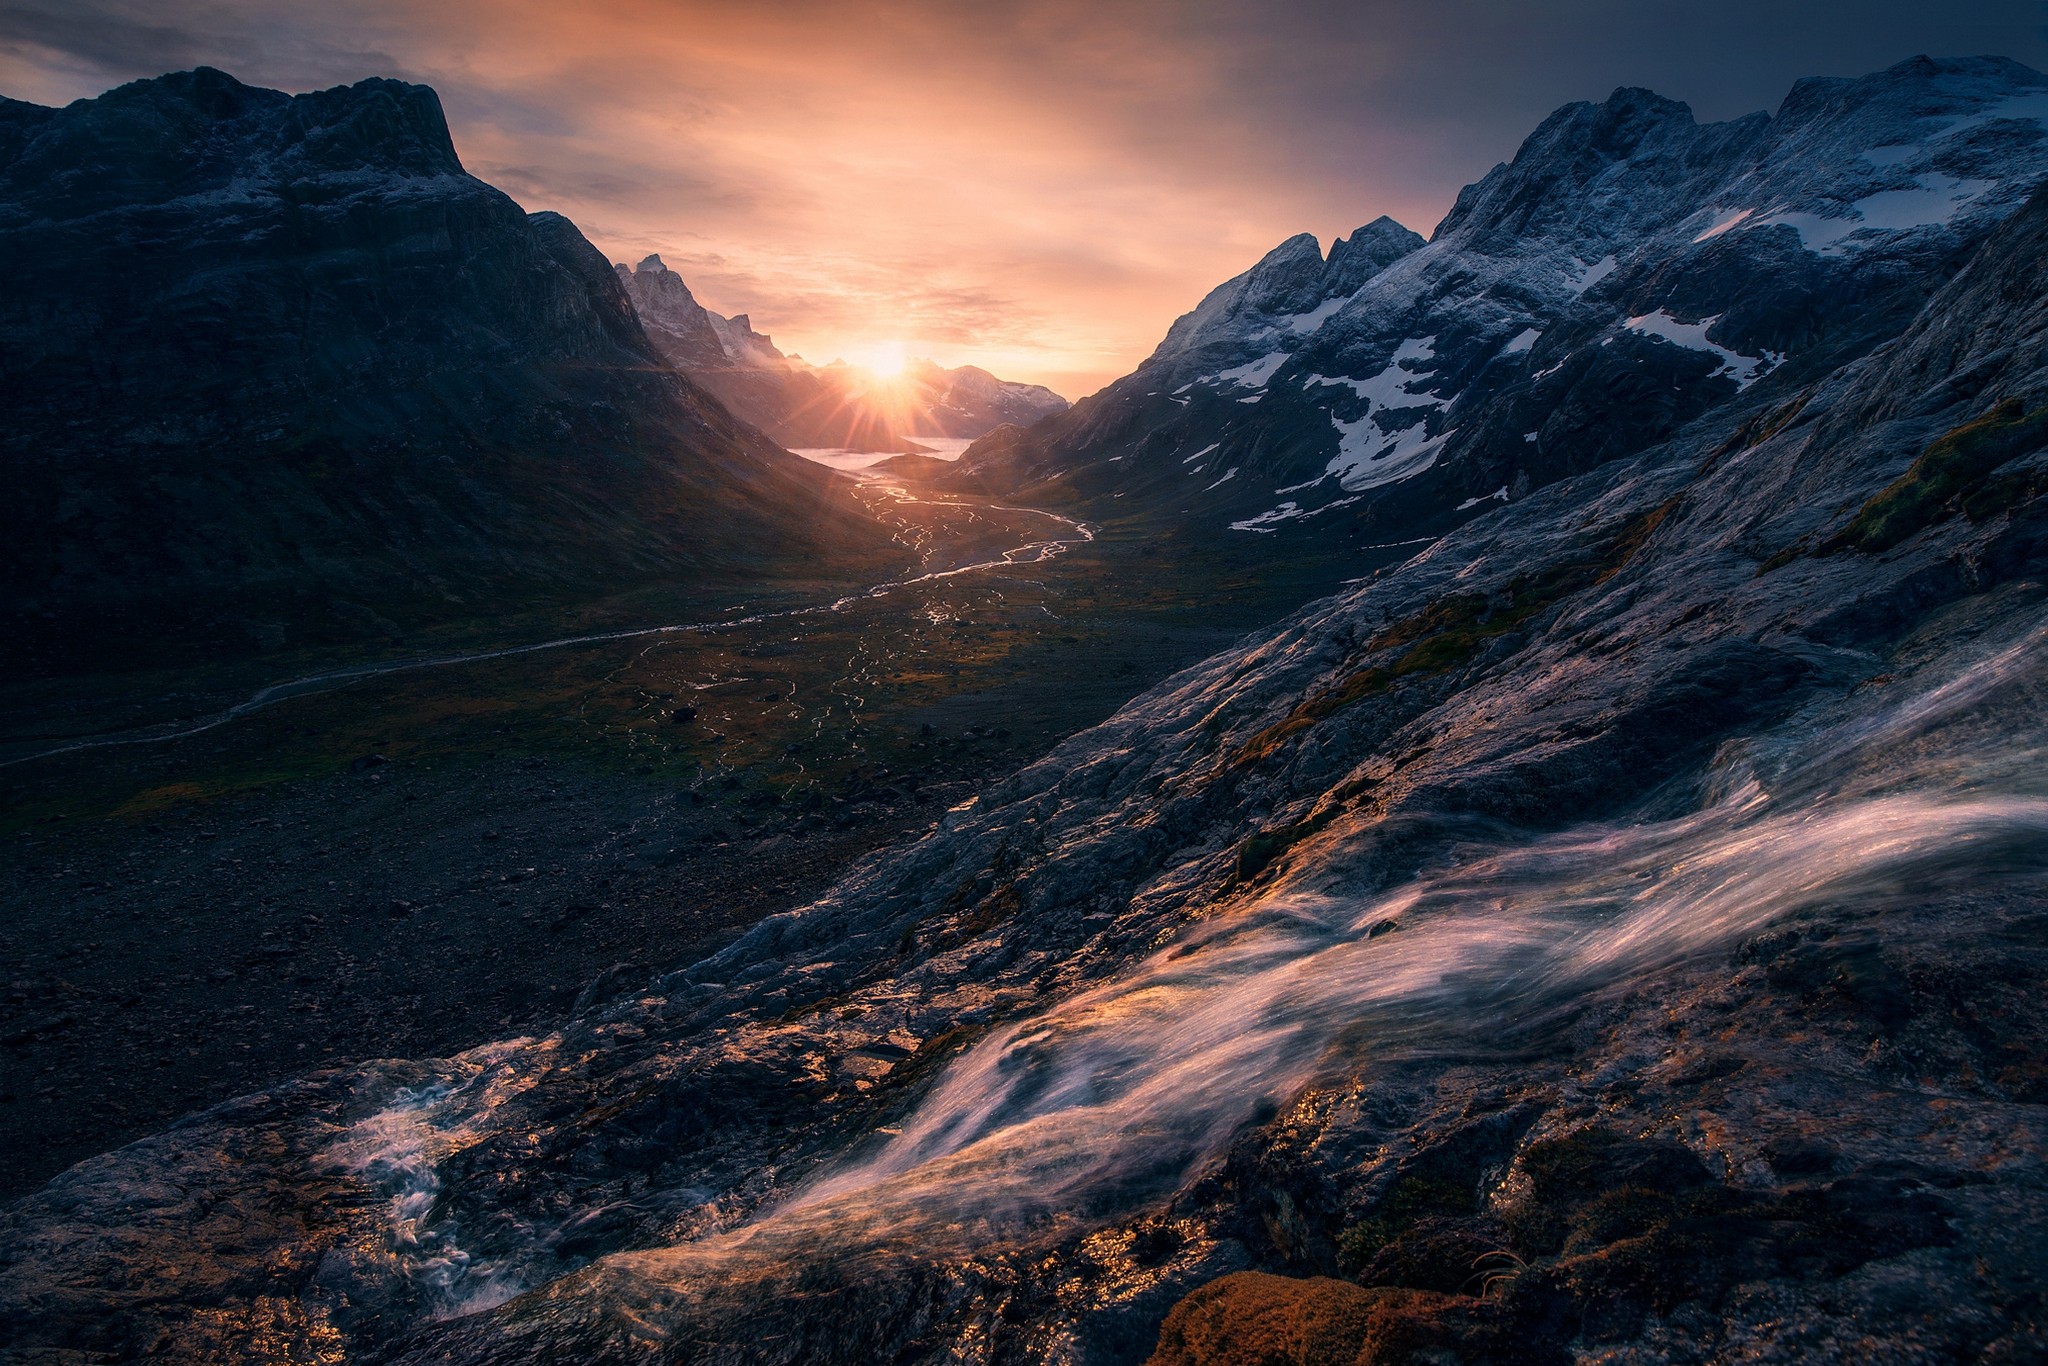 General 2048x1366 nature landscape mountains valley river snowy peak creeks sky sunlight Greenland nordic landscapes